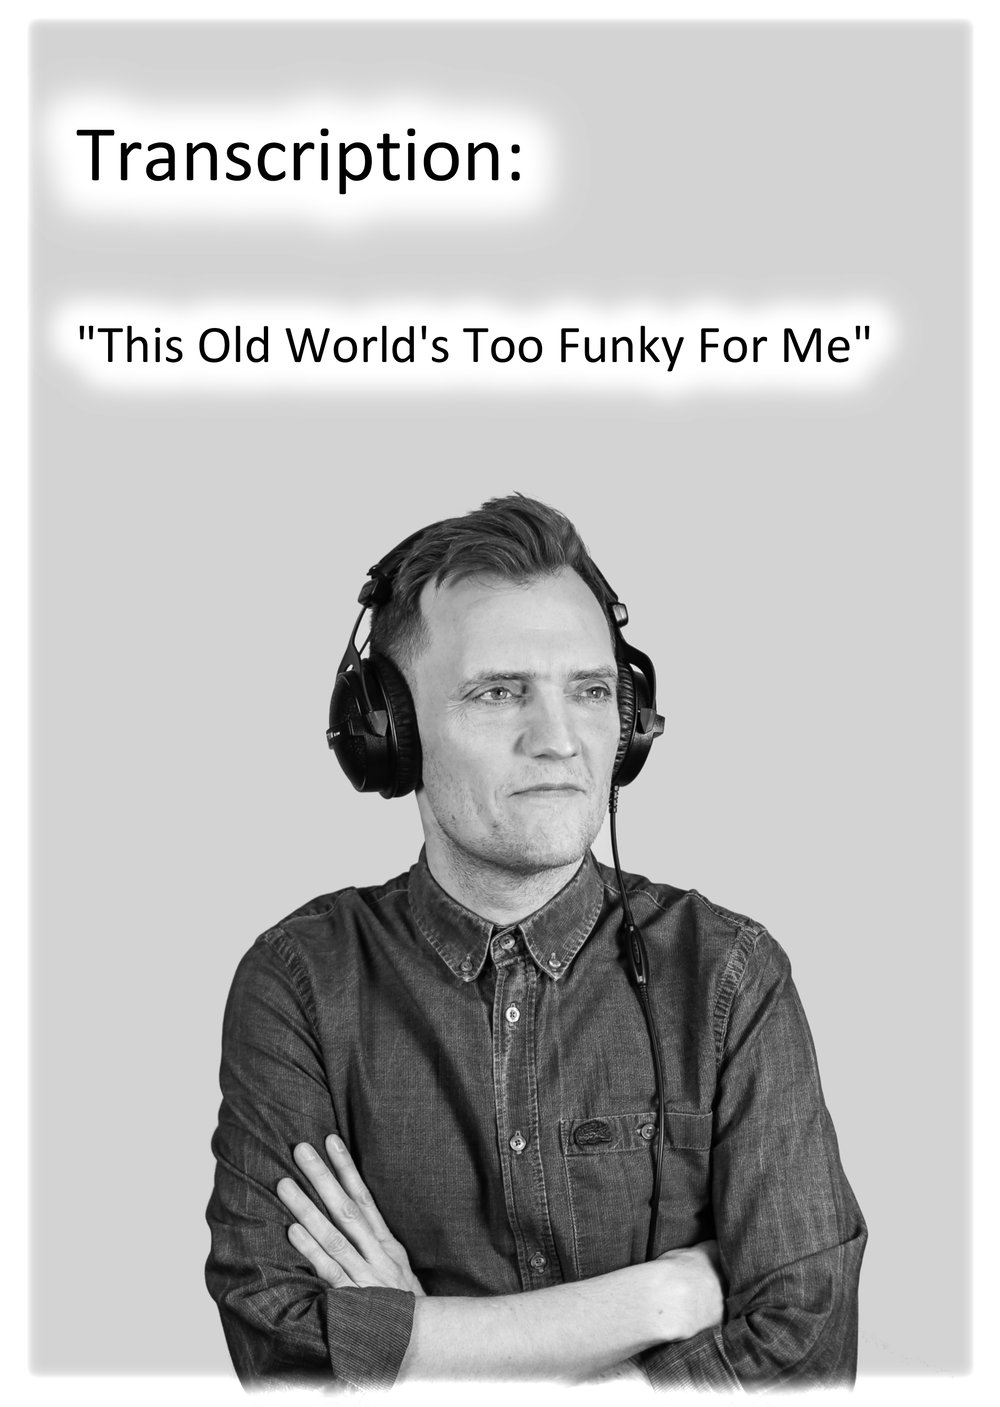 Image of Transcription: "This Old World's Too Funky For Me"